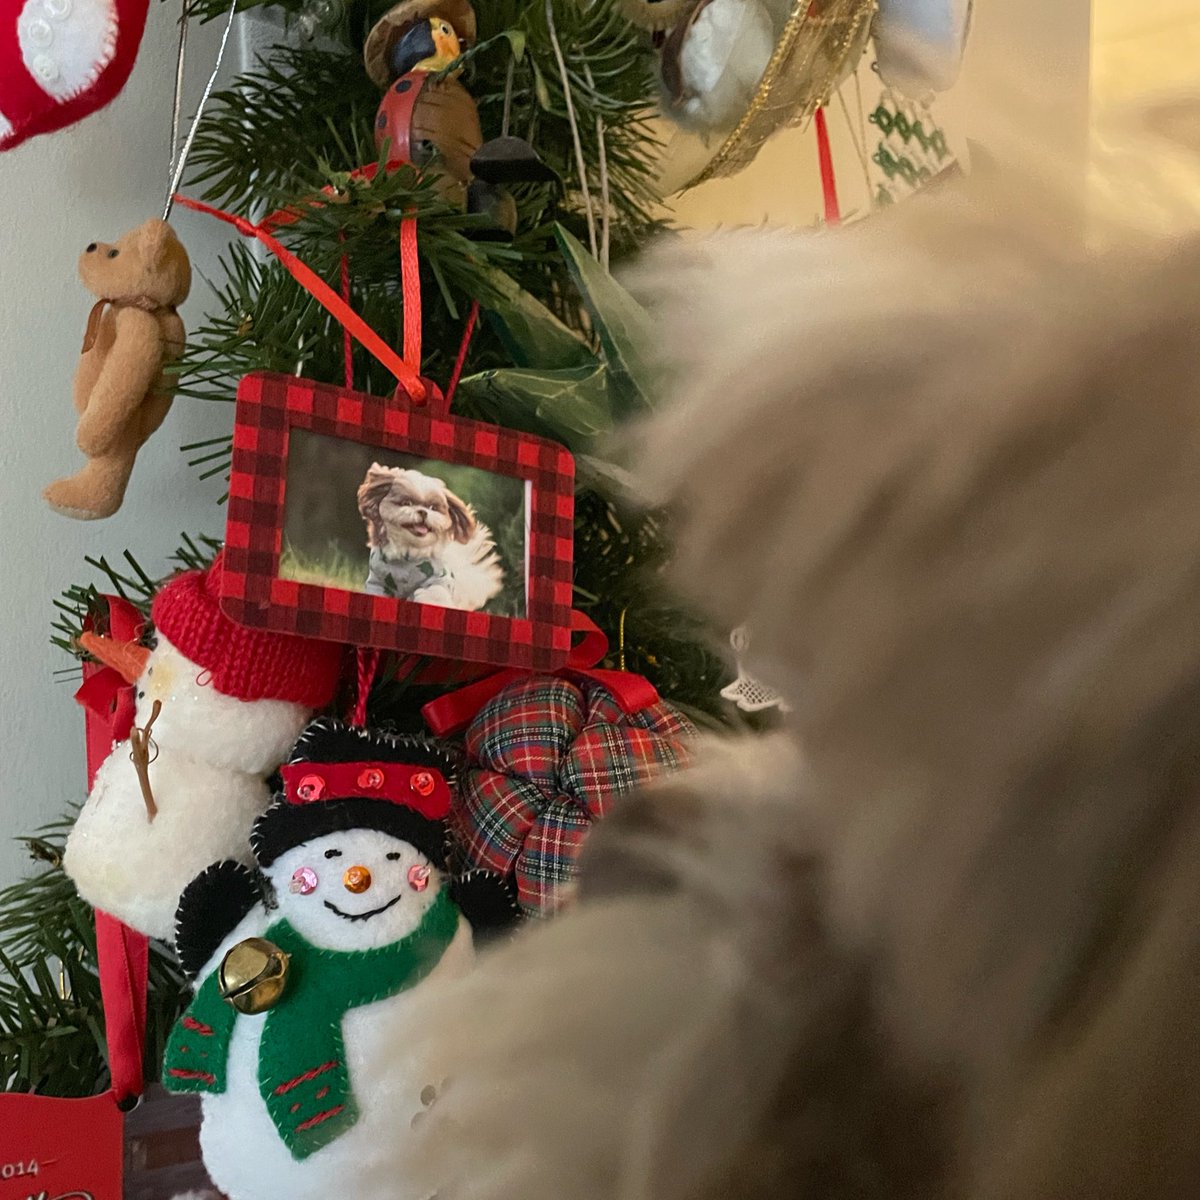 Me looking at Grannie’s new ornament which is also me. #christmastreeornament #ornament #treeornament #ChristmasOrnament #dogphotos